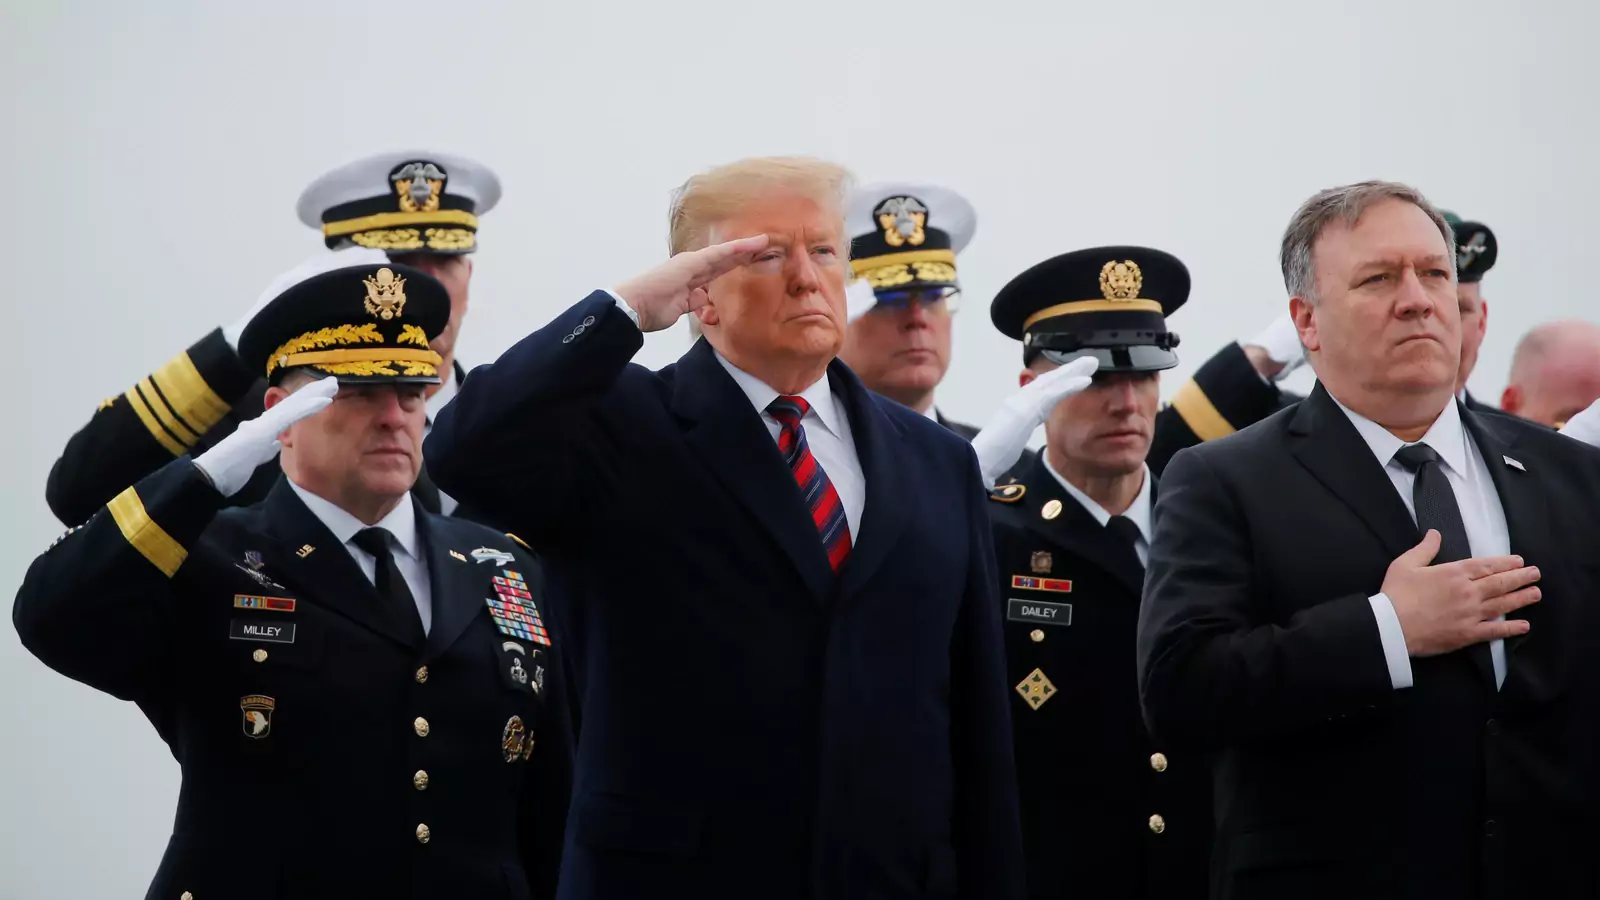 Chief of Staff of the U.S. Army Mark Milley, President Donald Trump, Sgt. Maj. of the Army Daniel Dailey and Secretary of State Mike Pompeo salute as a military honor guard carries the casket of Scott Wirtz